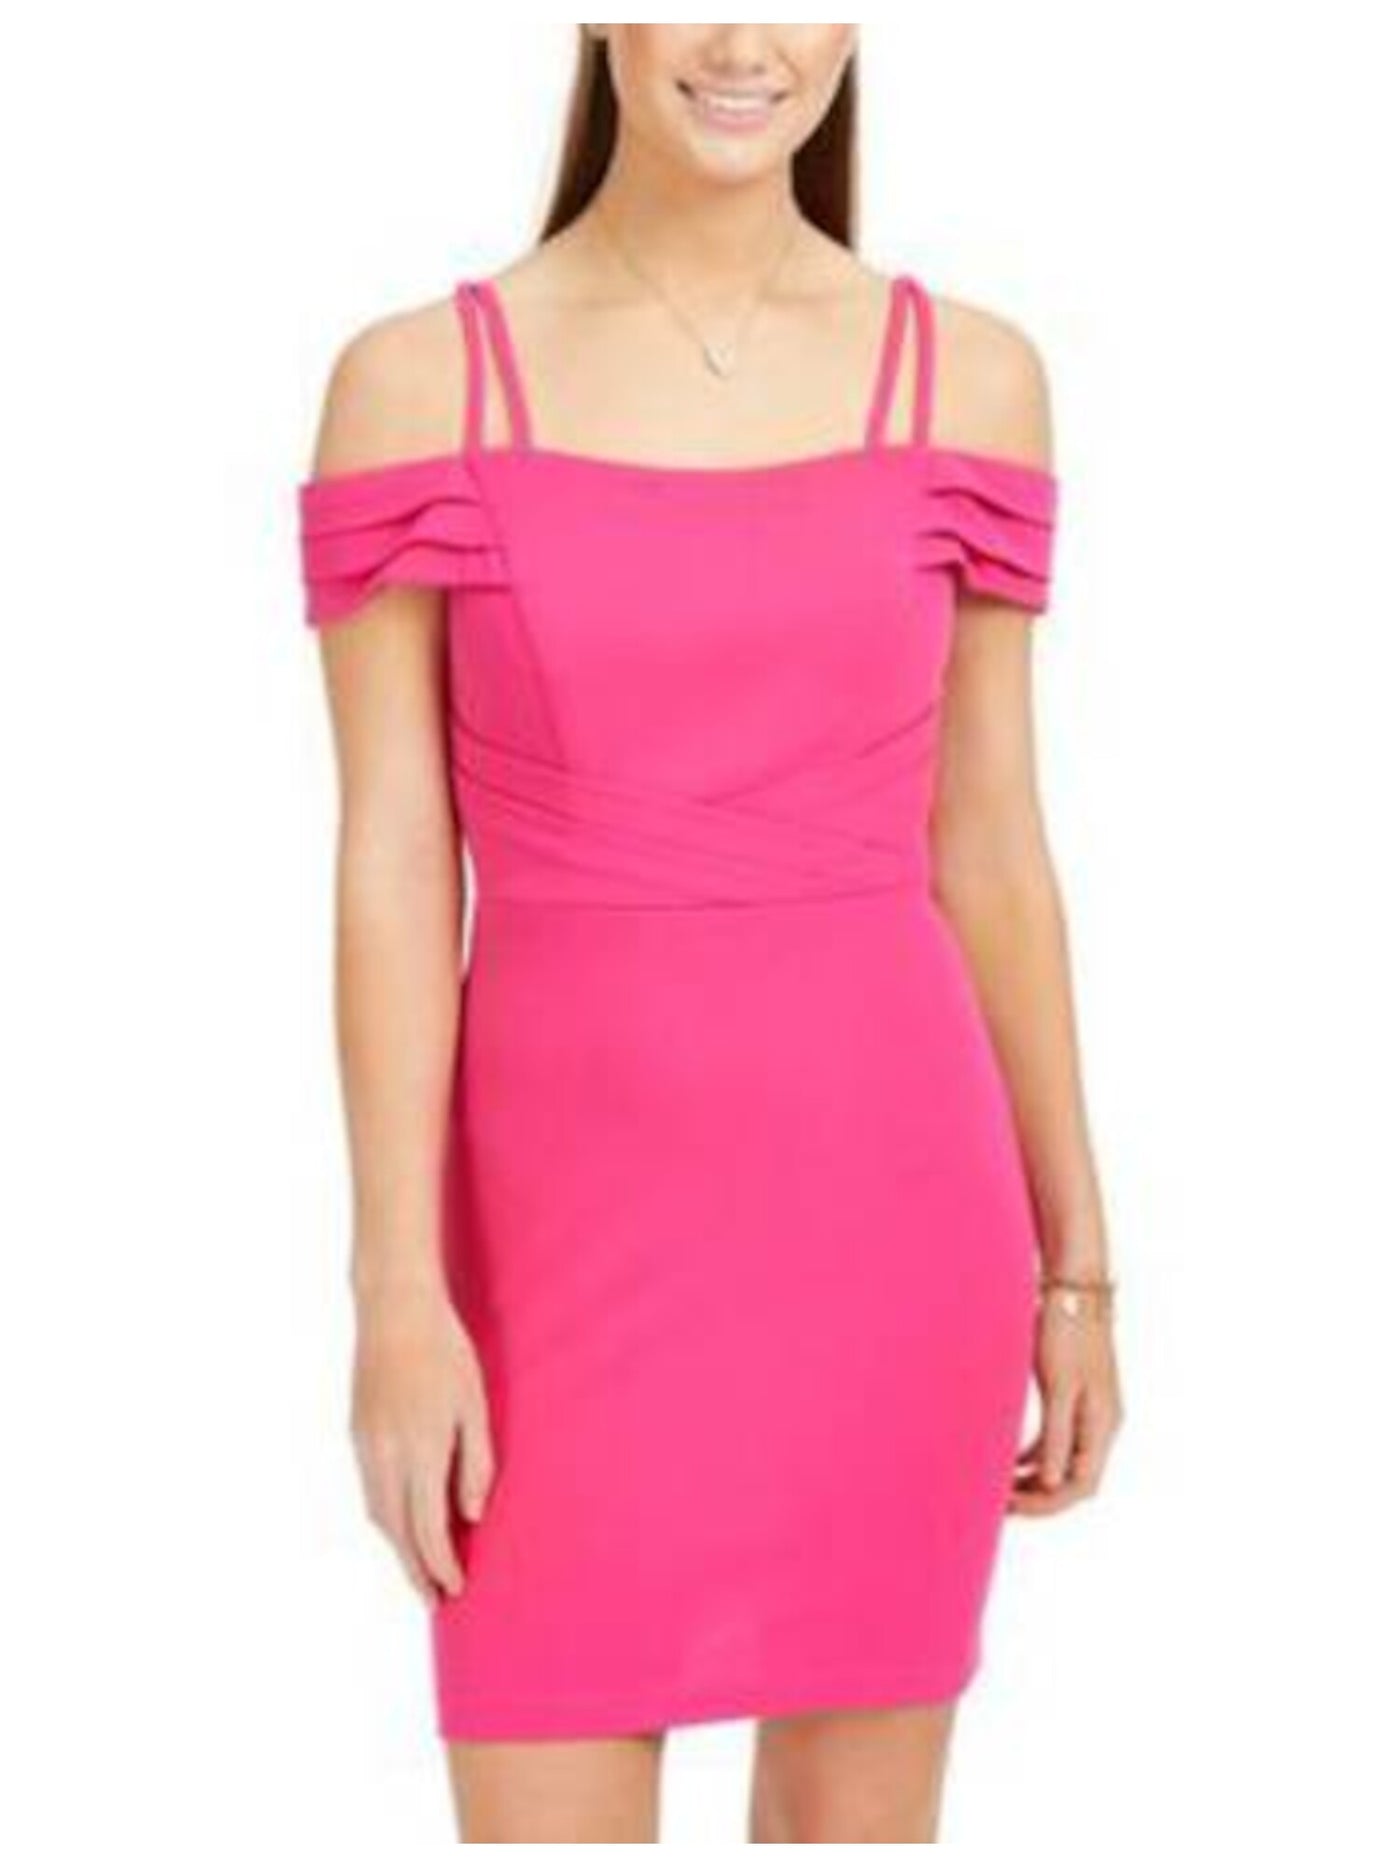 TEEZE ME Womens Pink Cold Shoulder Spaghetti Strap Short Evening Body Con Dress Juniors 9\10